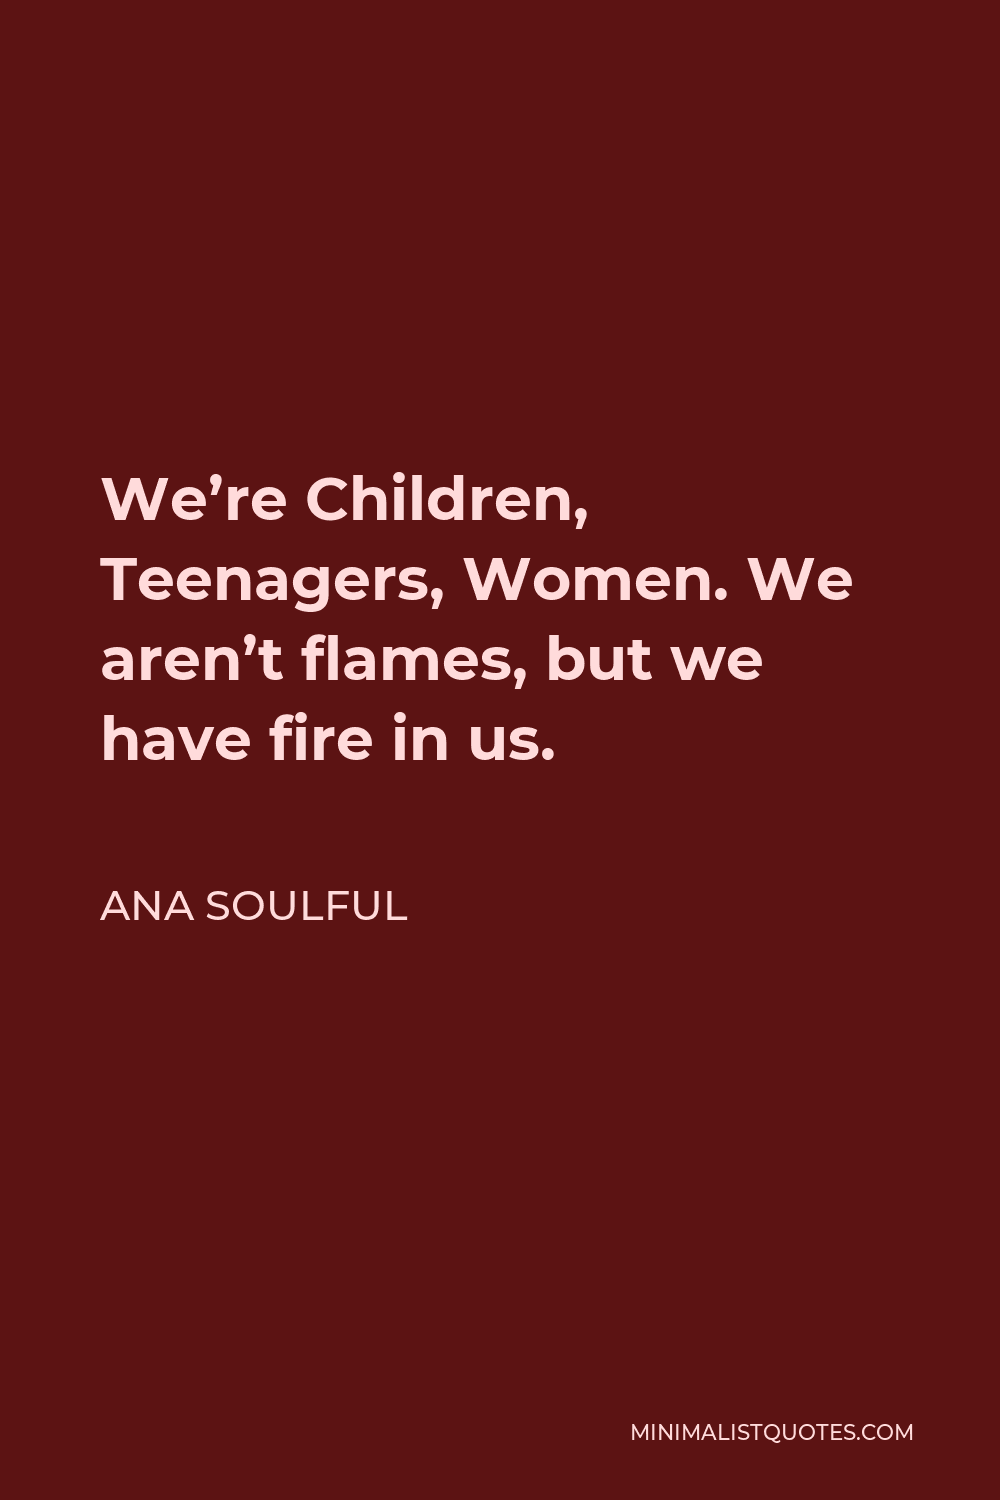 Ana Soulful Quote - We’re Children, Teenagers, Women. We aren’t flames, but we have fire in us.